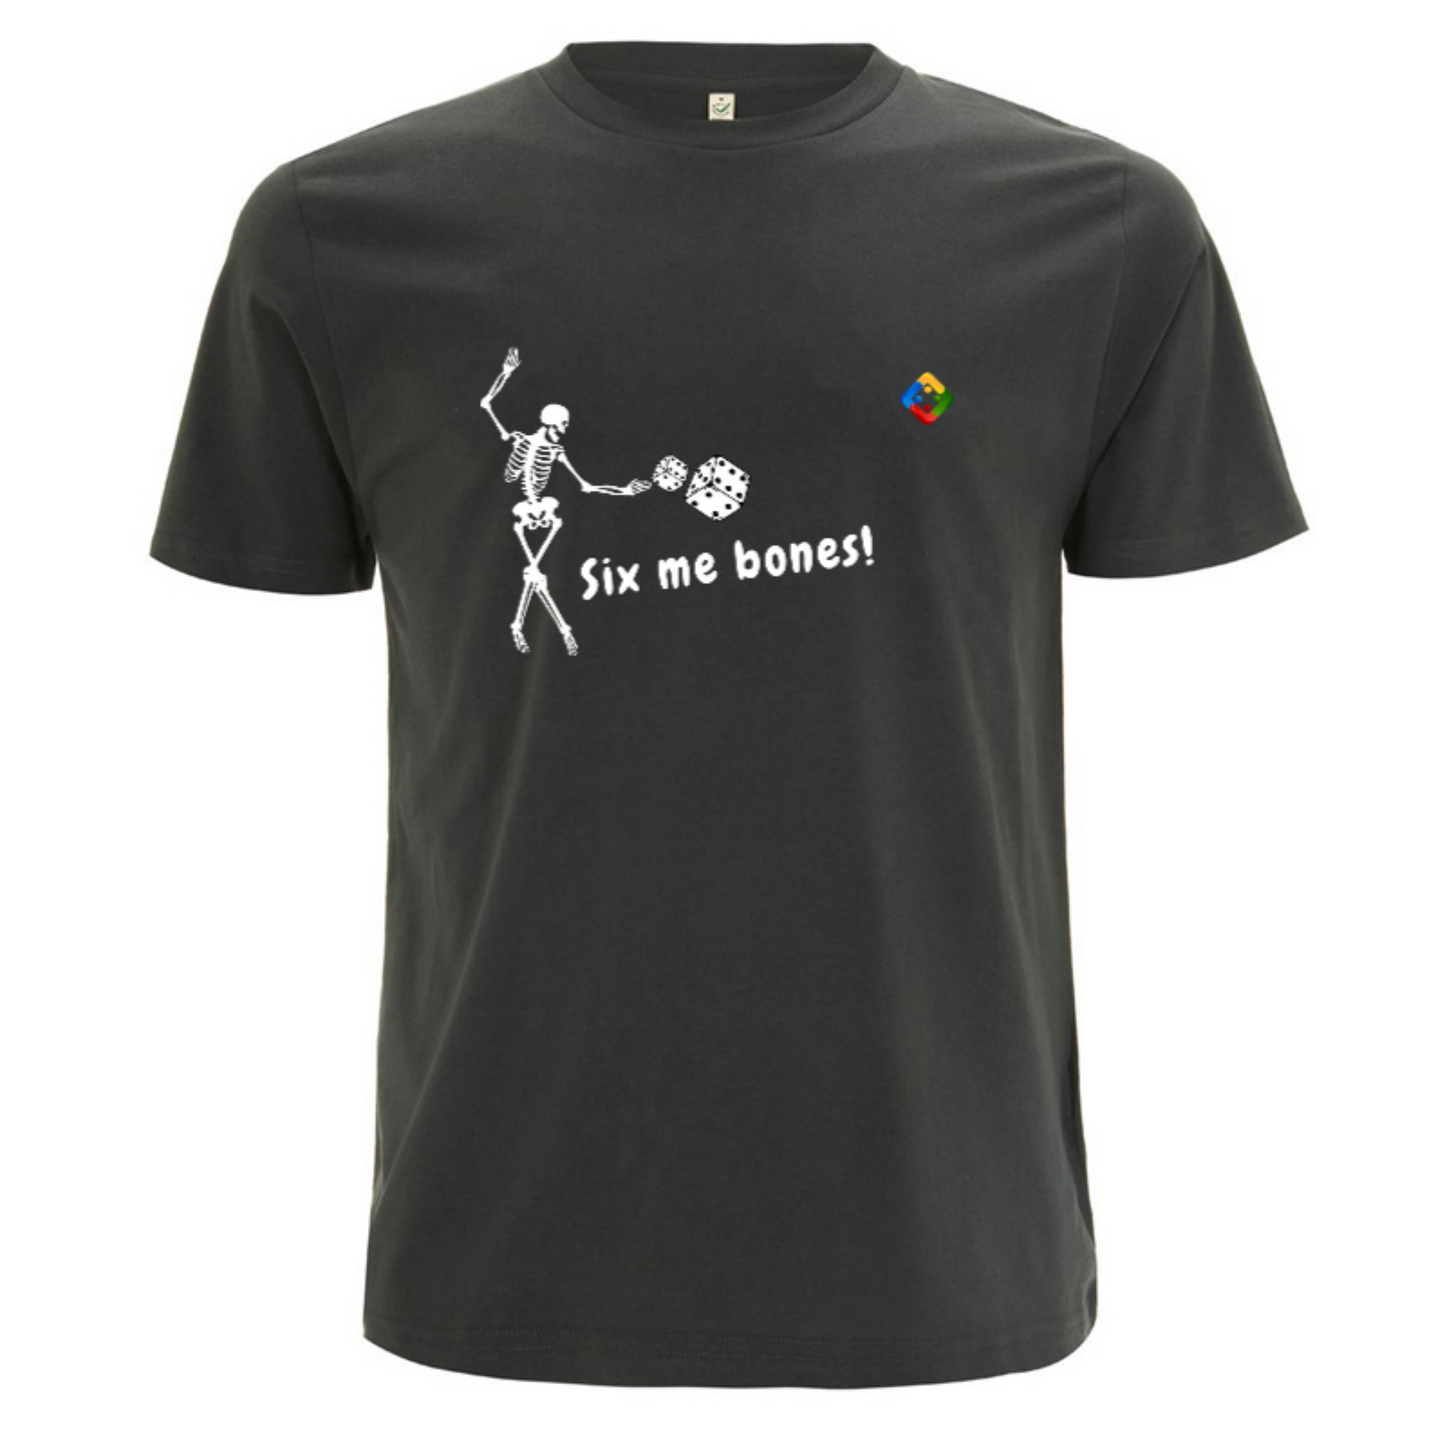 Men's organic T-shirt with printed 'Six me' design. Available in 11 colours.